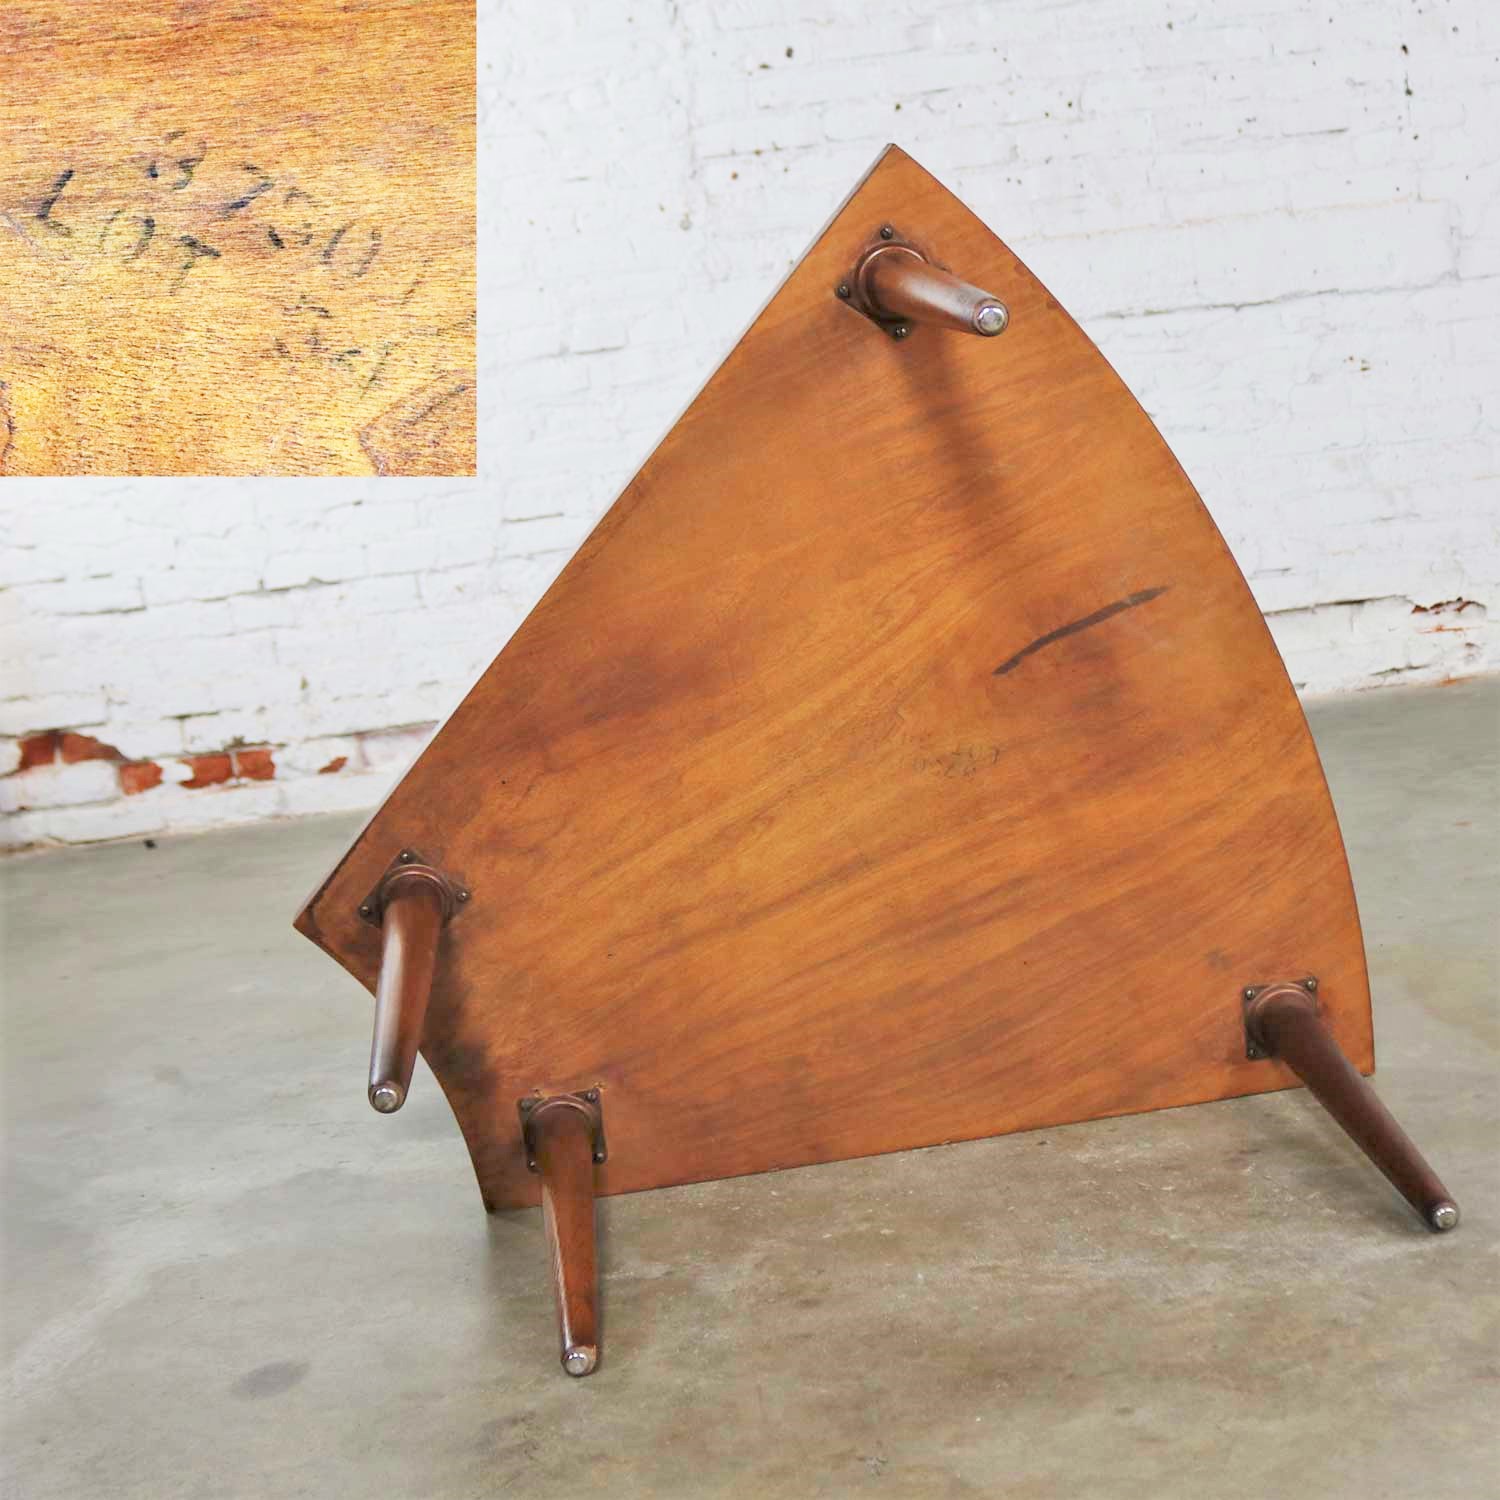 Walnut Wedge Shape End Table Attributed to Merton Gershun for American of Martinsville